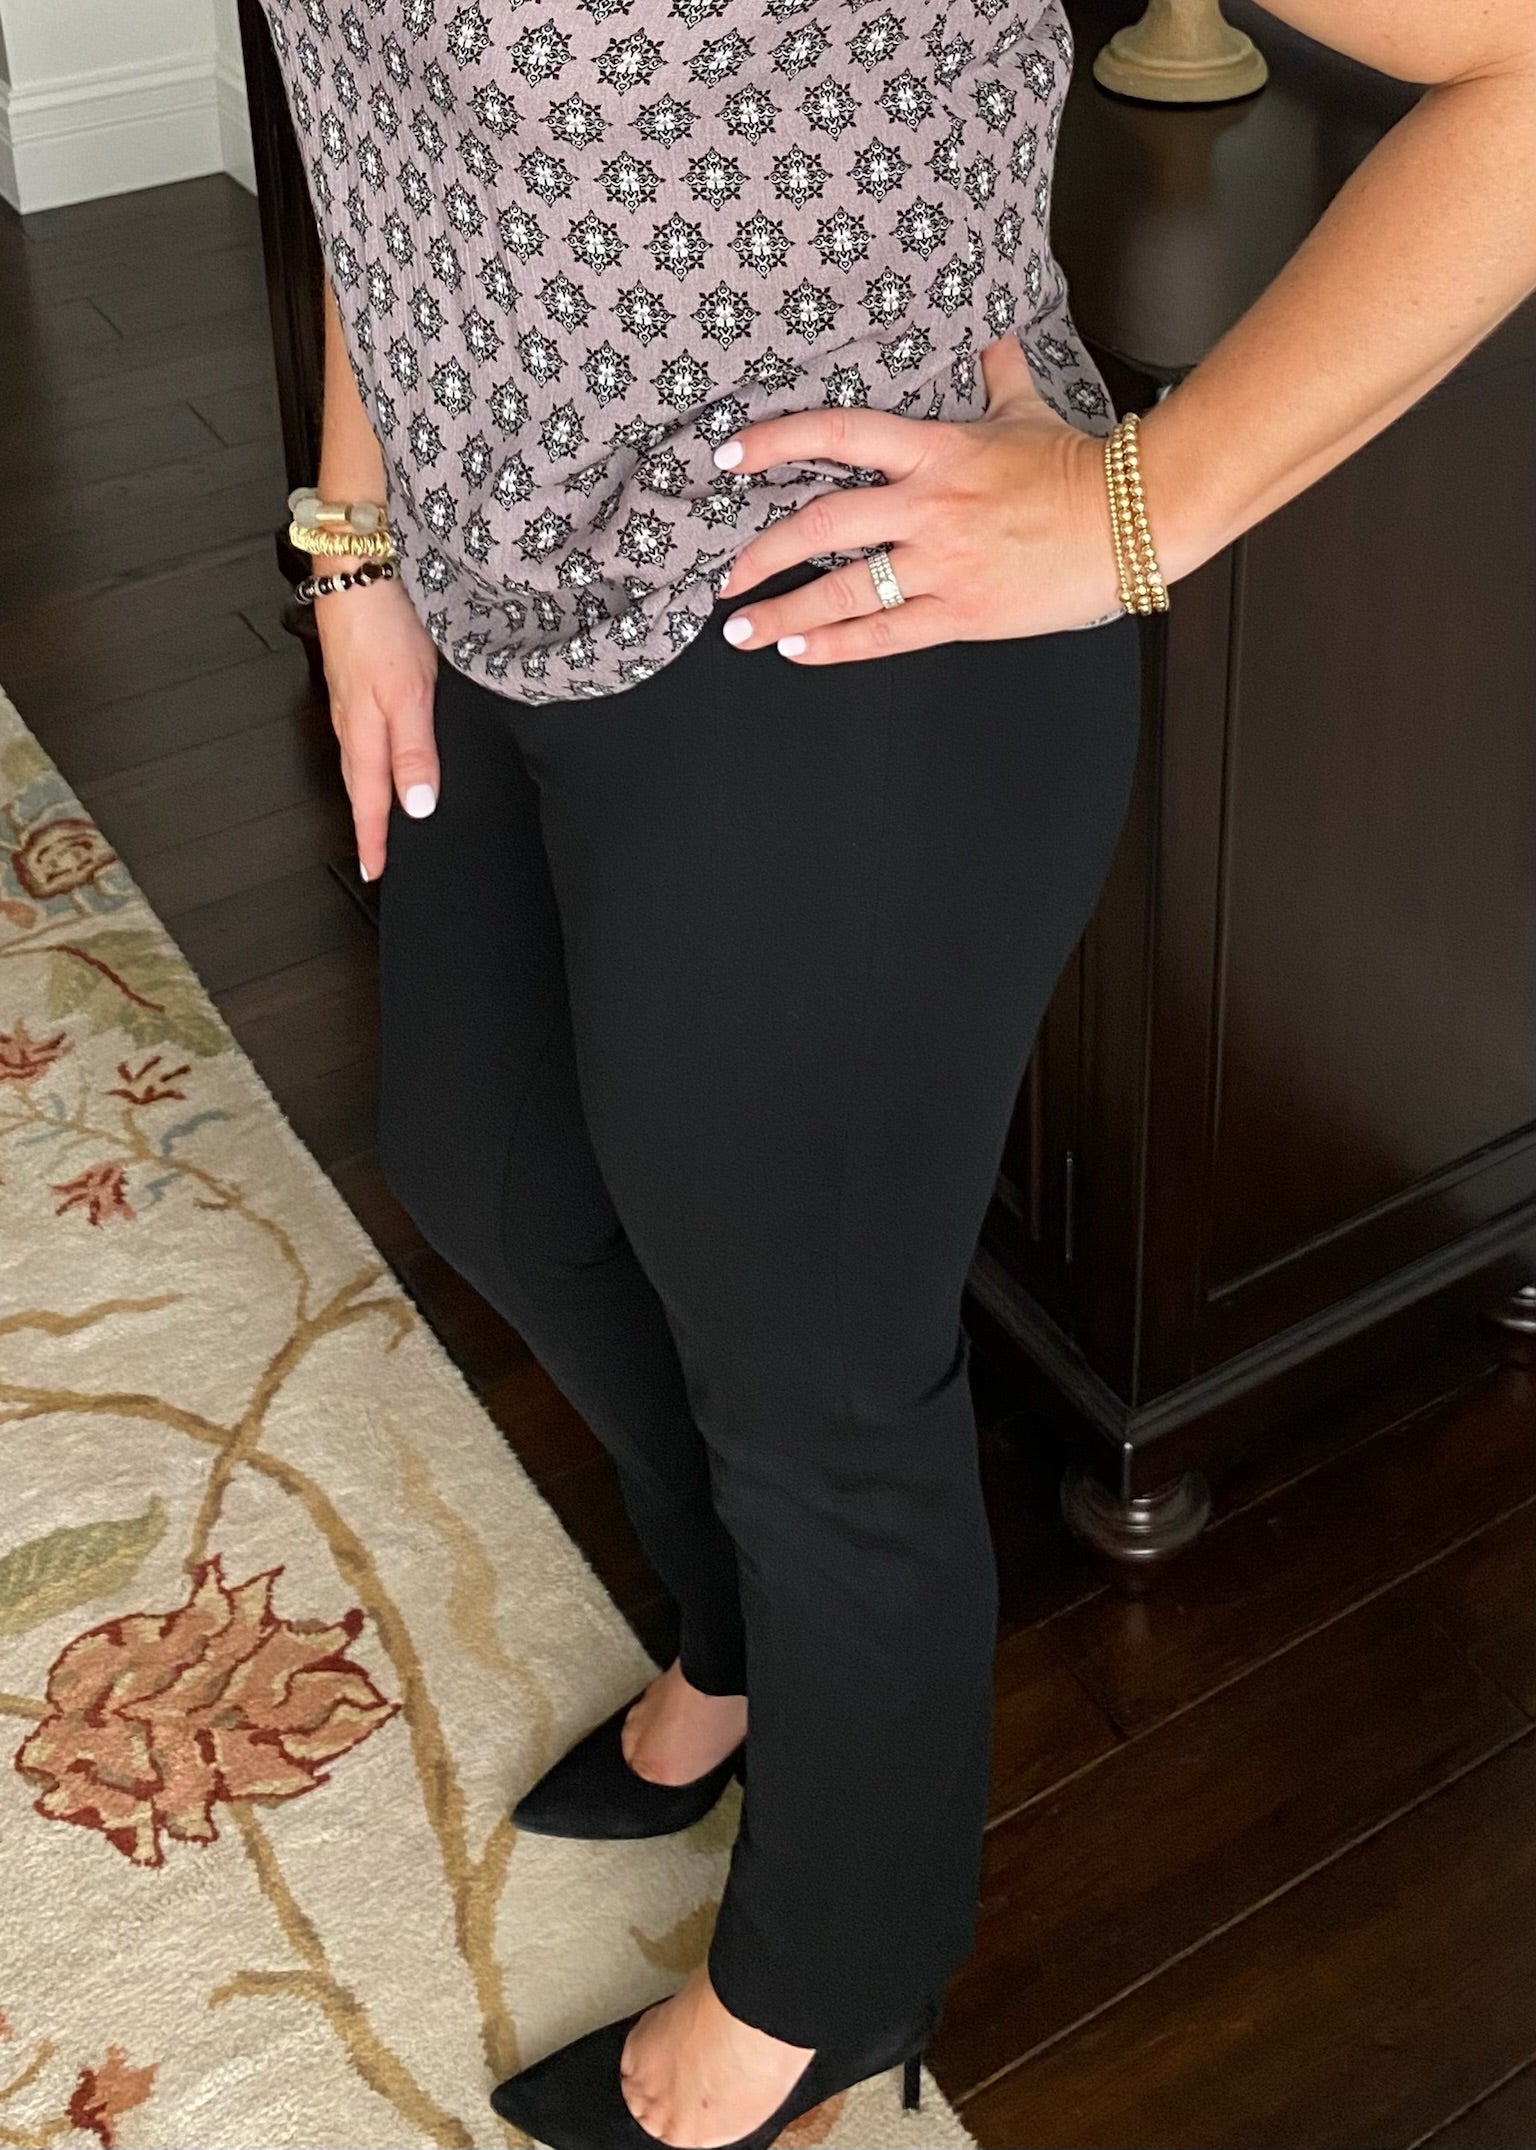 SPANX - NEW! NEW! NEW! The Perfect Black Pant, Straight Leg is your new  go-to for any outfit or occasion. Thanks to—seriously, magical—smoothing  ponte fabric and a comfortable, pull-on design, this style